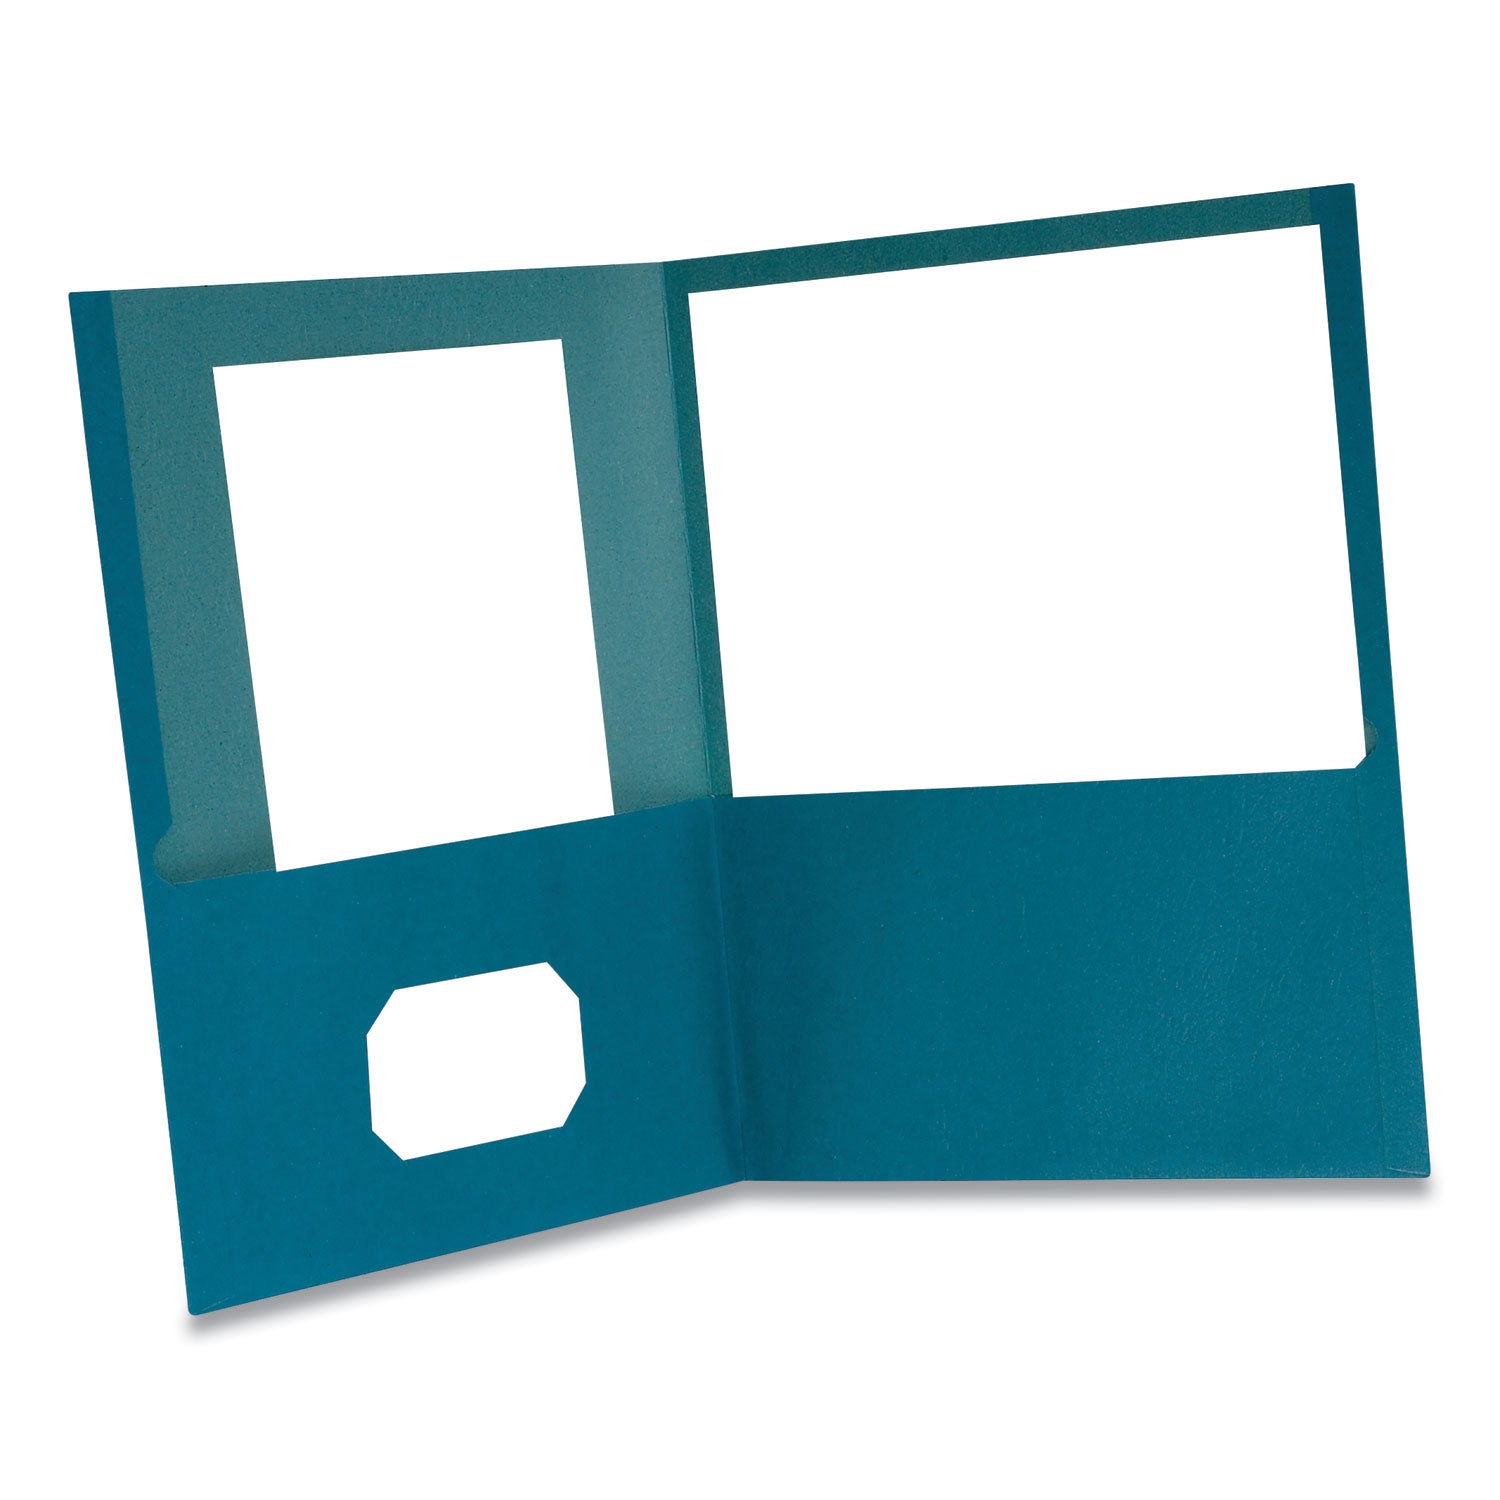 earthwise-by-oxford-100%-recycled-paper-twin-pocket-portfolio-100-sheet-capacity-11-x-85-blue-10-pack_oxf00571 - 1